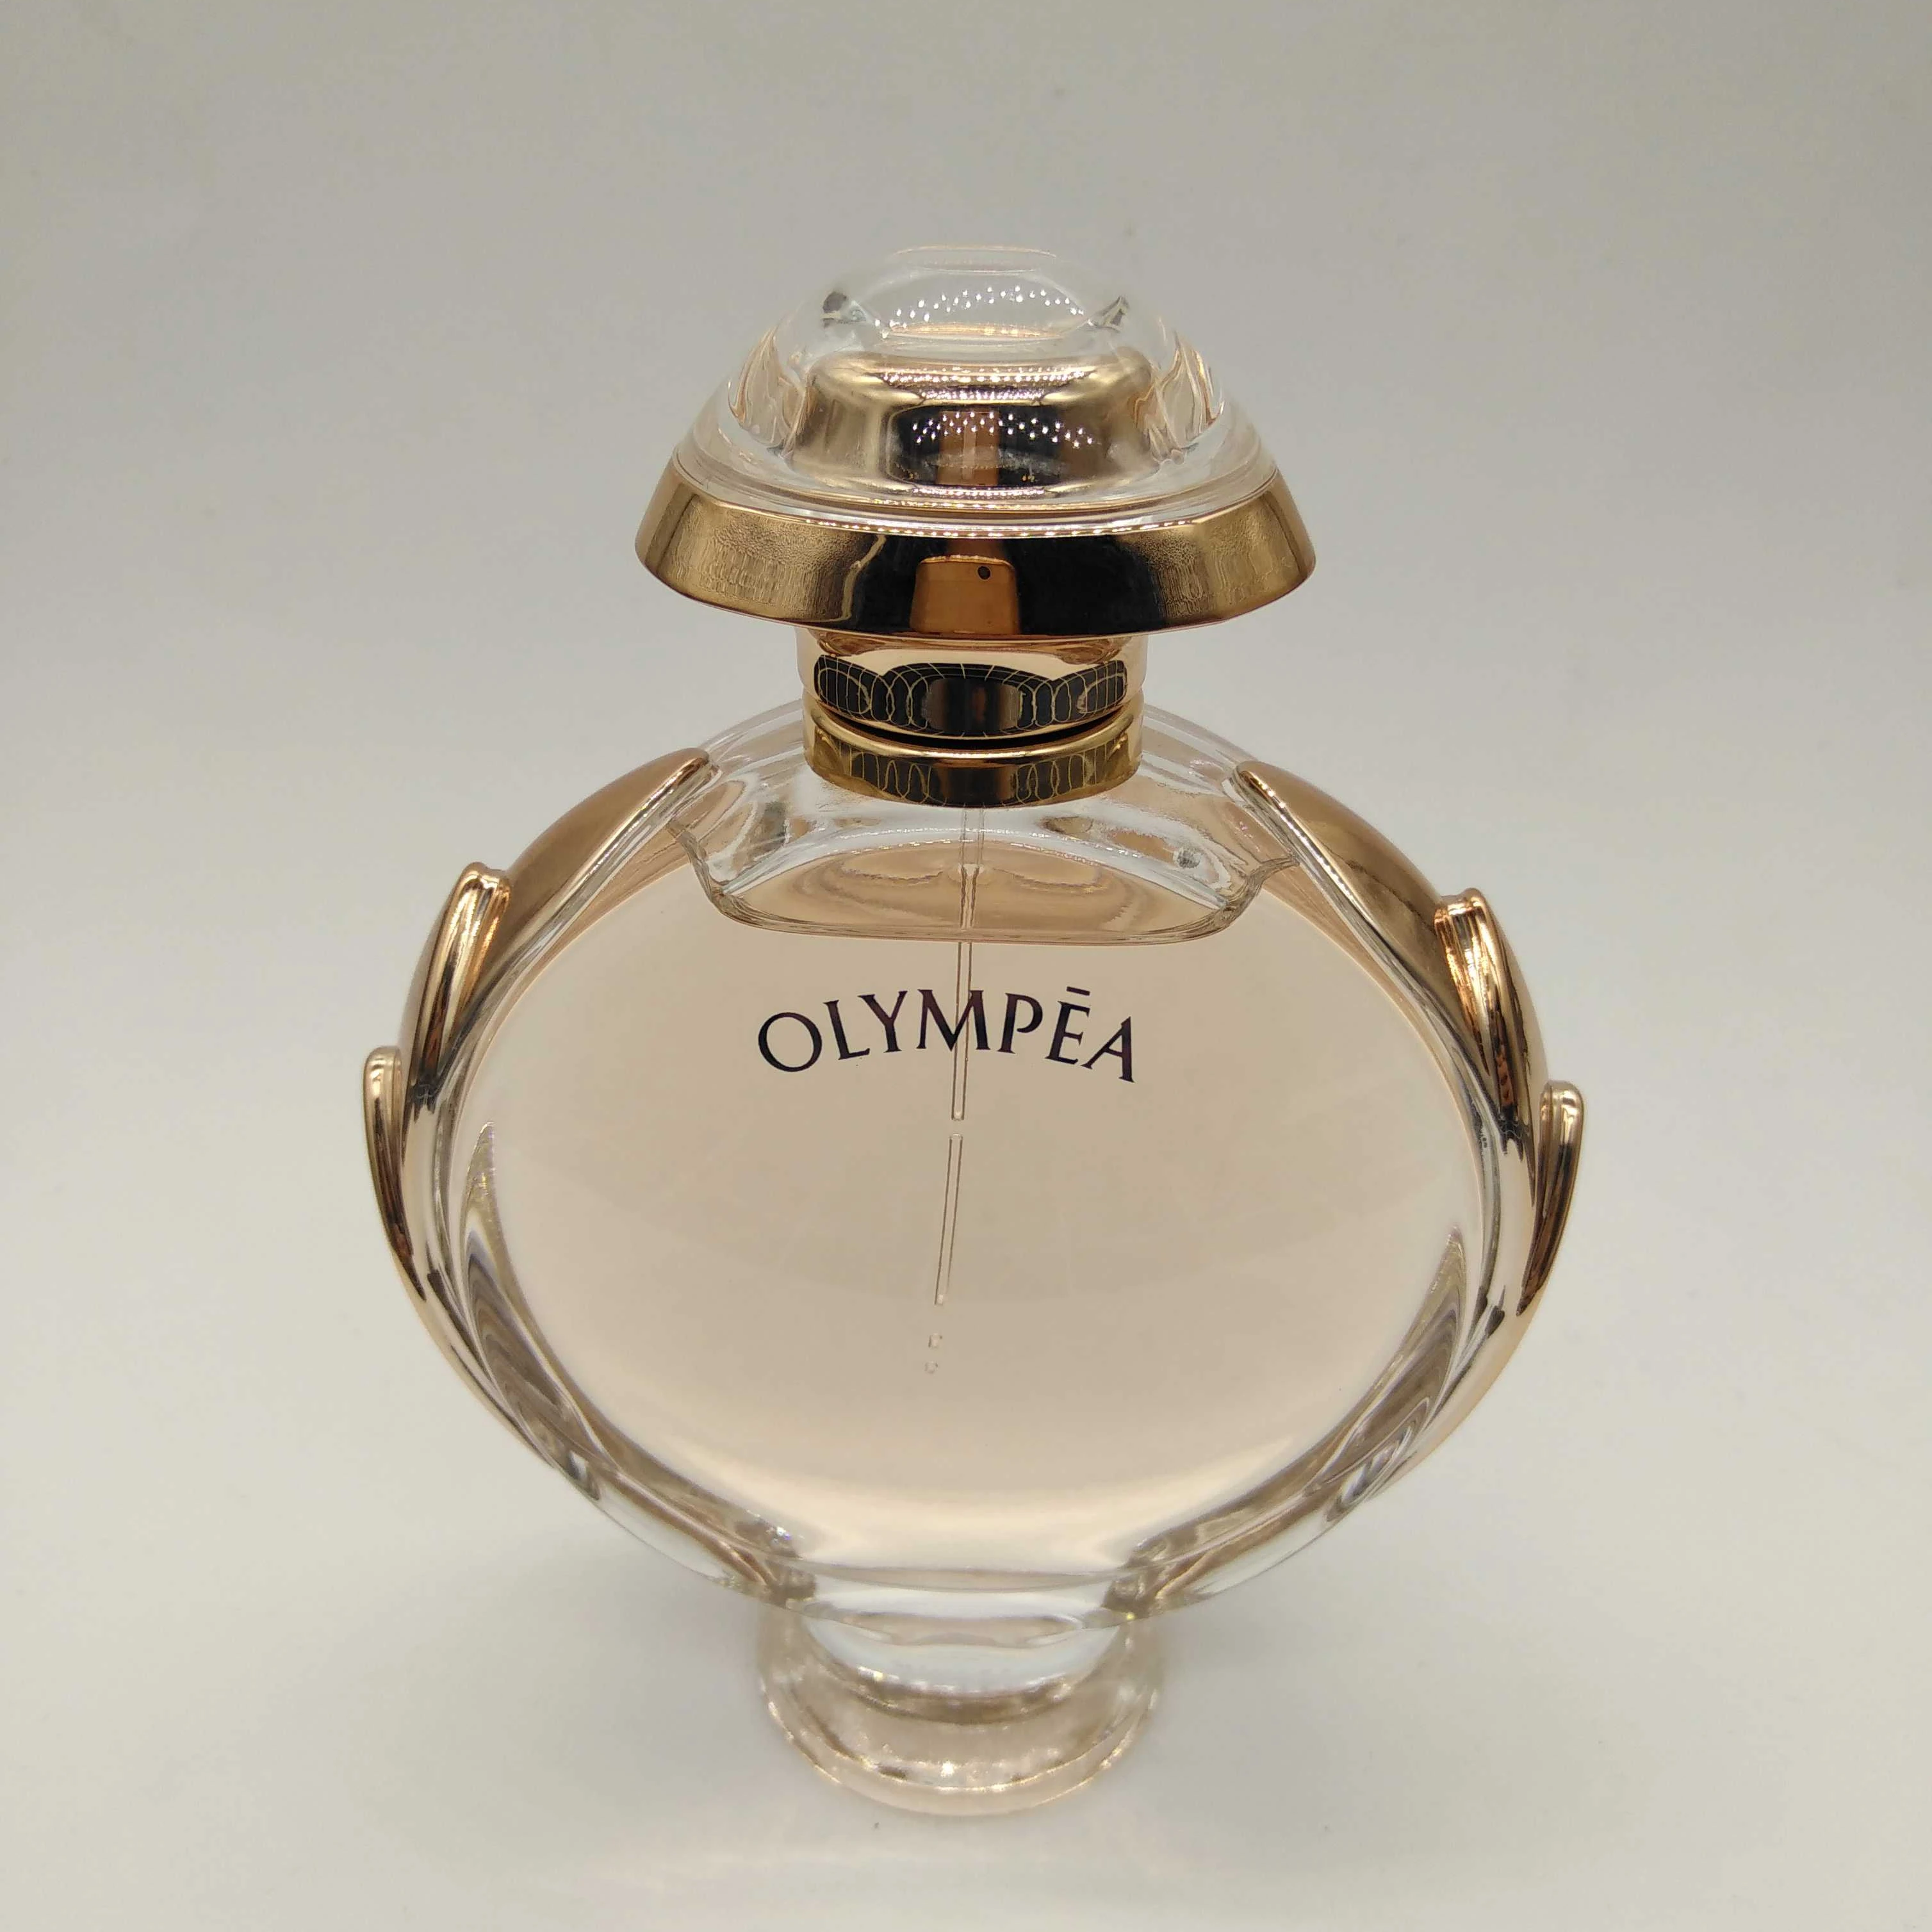 

Women Perfume Fragrance Olympea Floral Eau De Parfum for Lady In Stock Fast Shipping Good Quality EDP 2.7OZ Spray Cologne